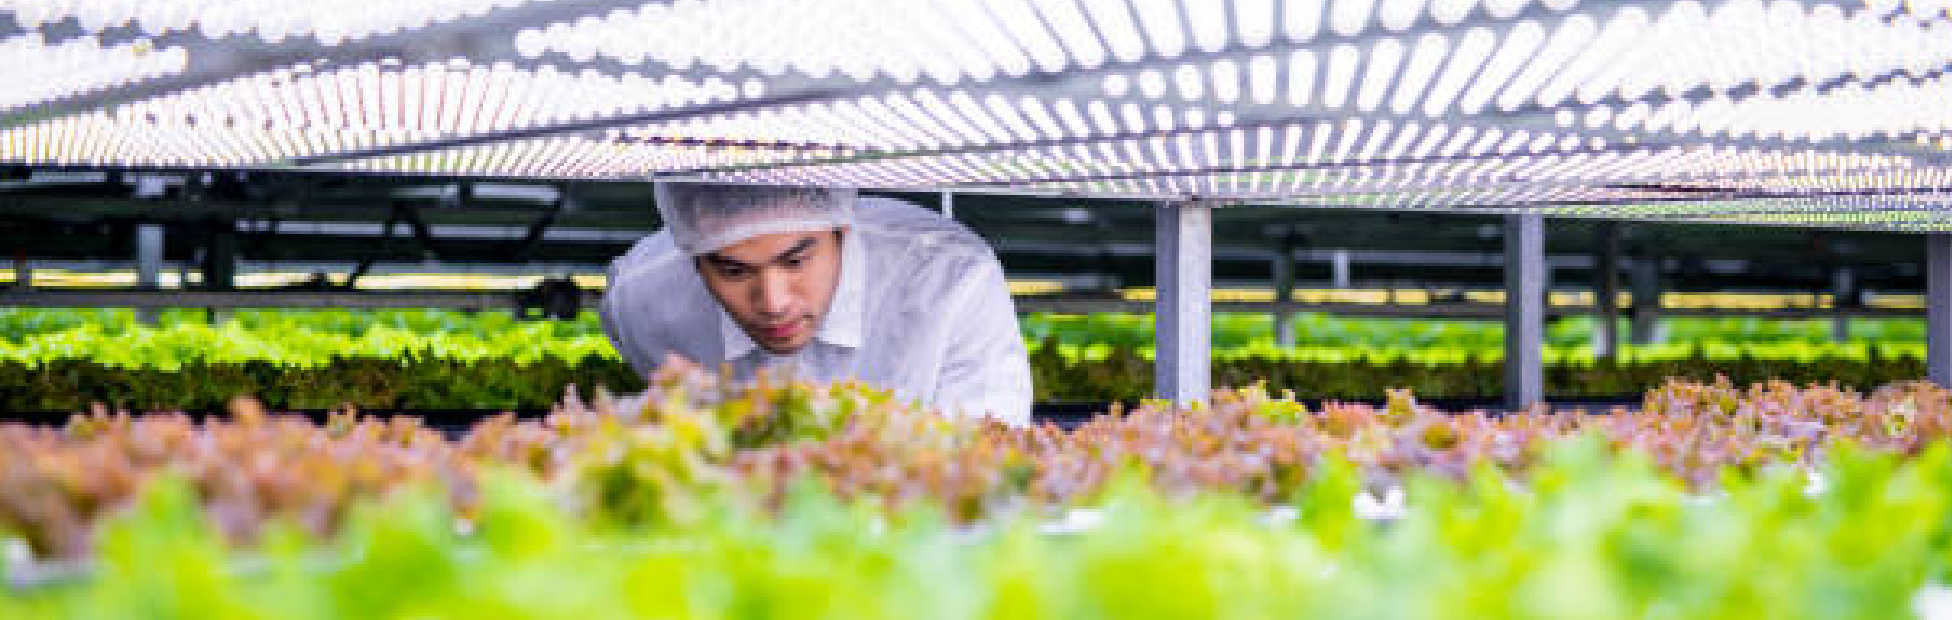 A worker in an AgriFood greenhouse laboratory looking at growing lettuce